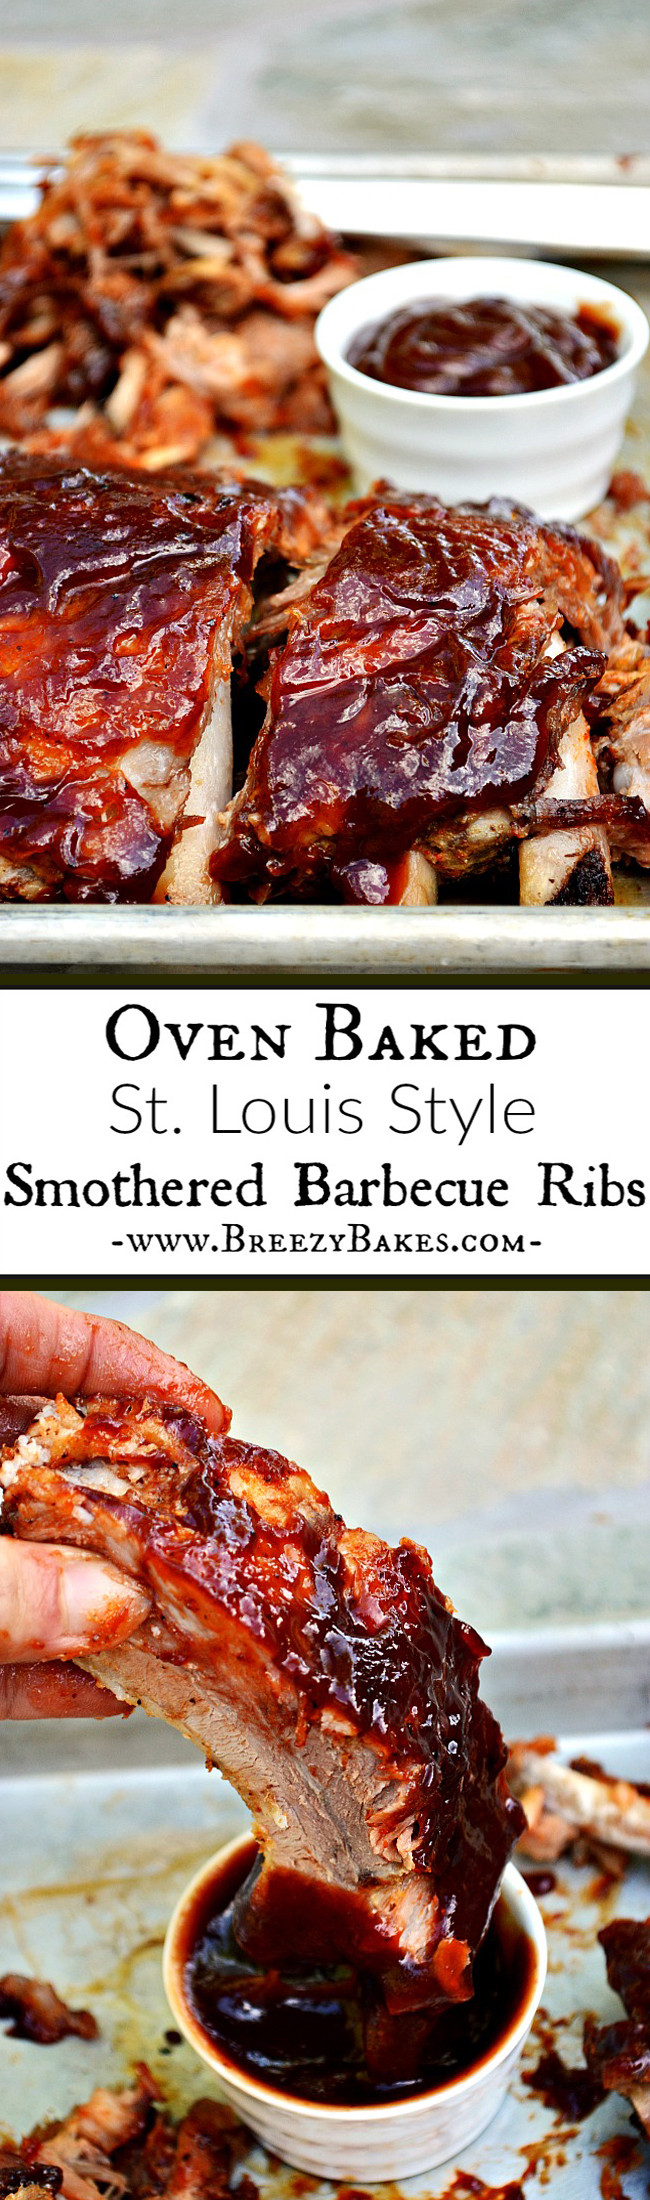 Pork Ribs In The Oven
 Oven Baked Barbecue Pork Ribs Breezy Bakes